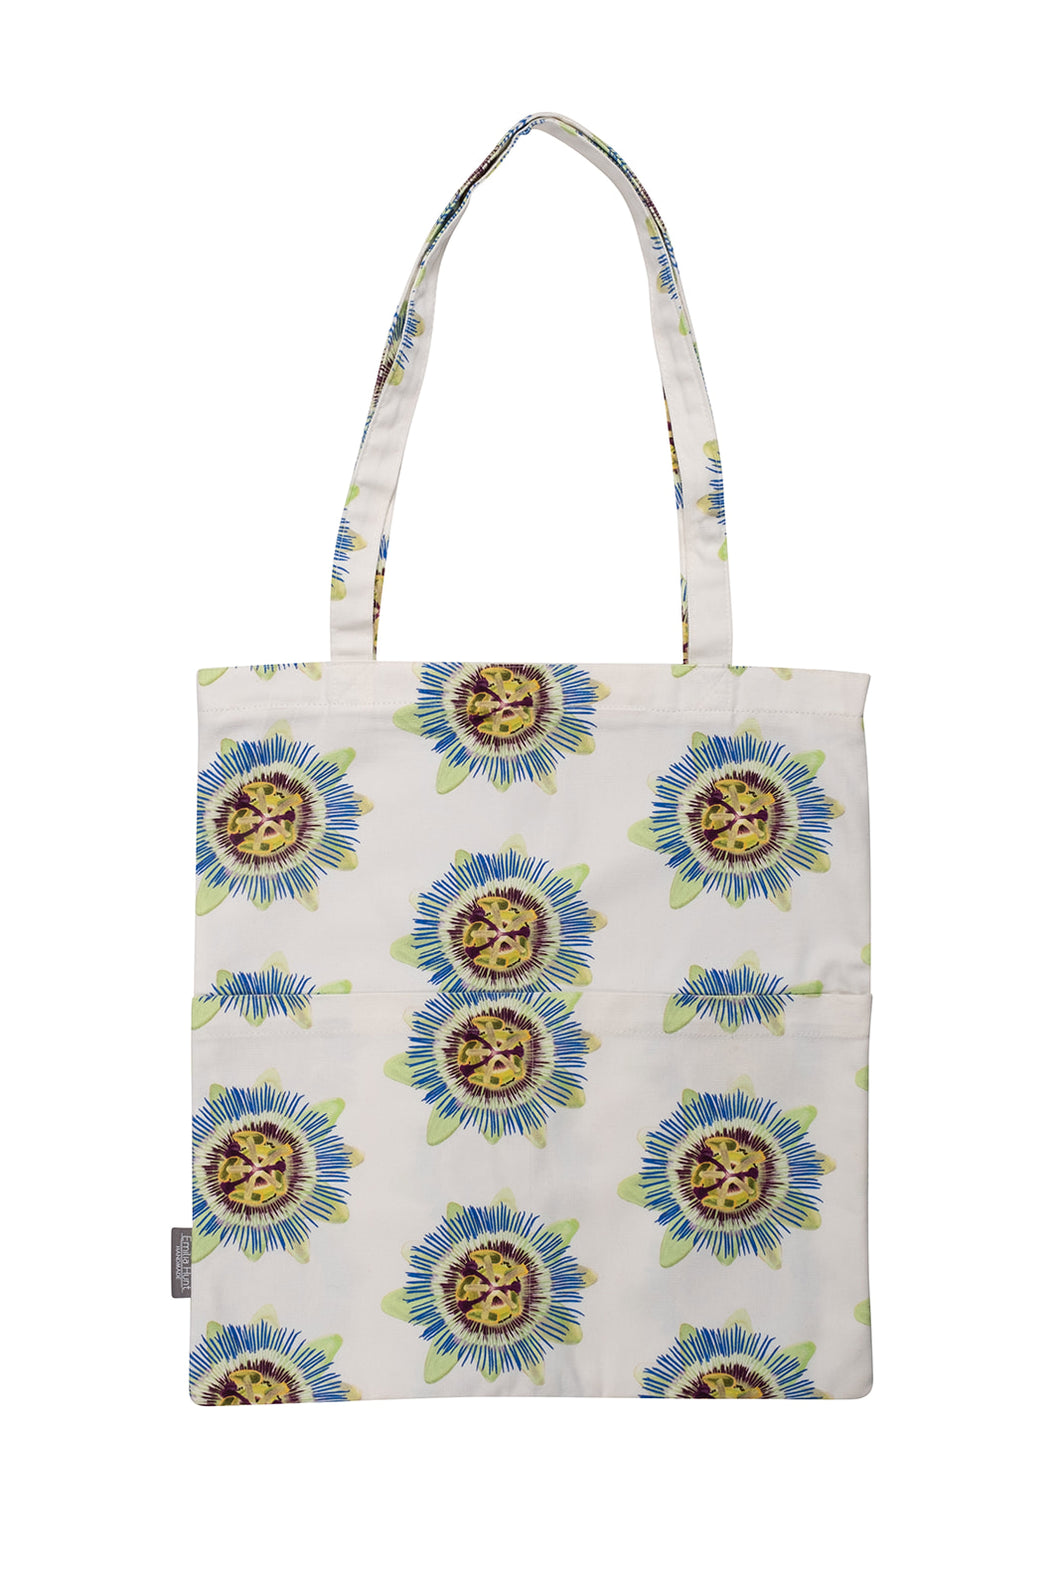 White Passion Flower Tote Bag